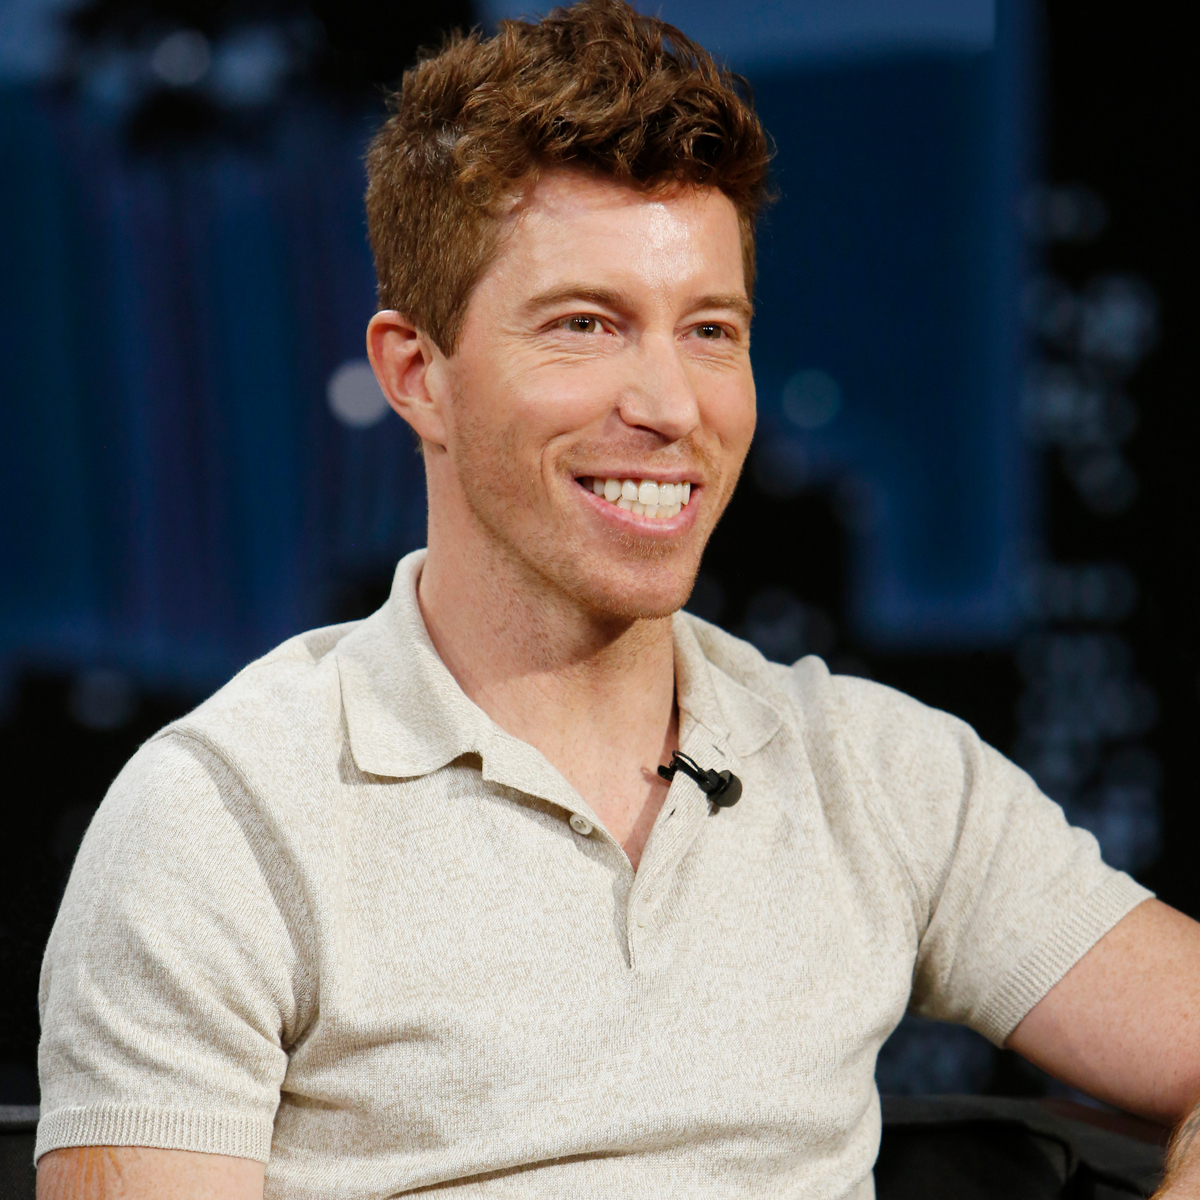 Forward Progress with Shaun White: My love-hate relationship with